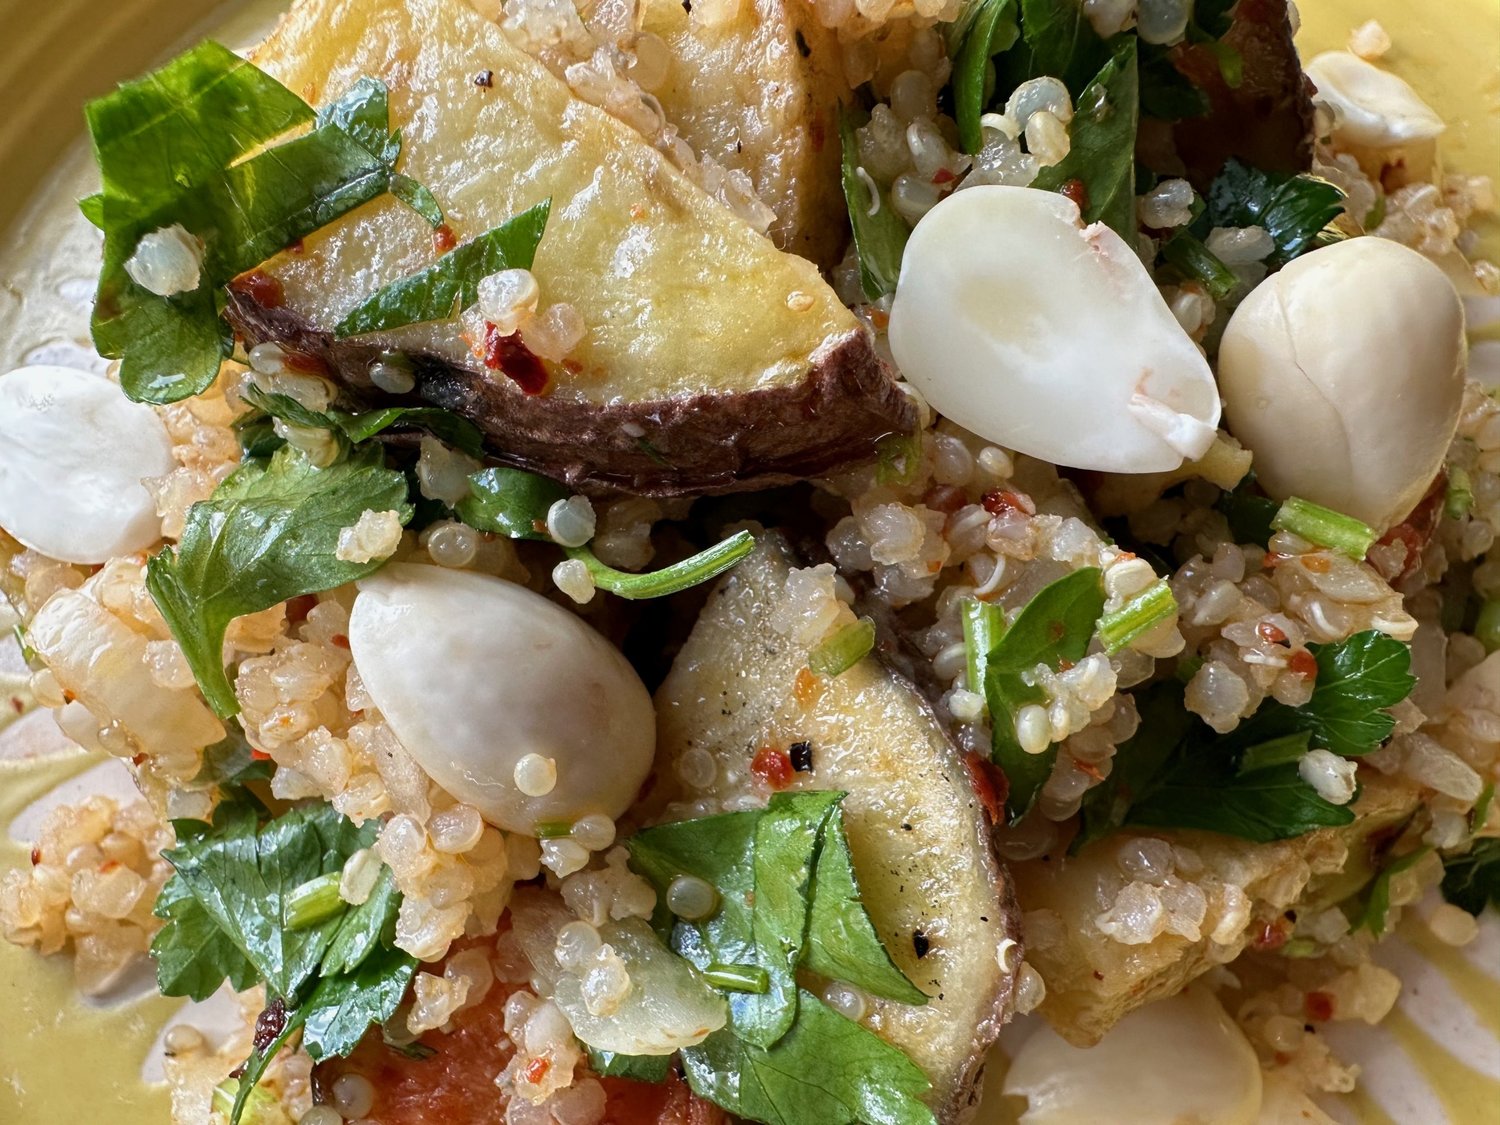 Sprouted quinoa, which has a cleaner, more flavorful taste than its unsprouted counterpart, fits perfectly in an elevated potato salad.